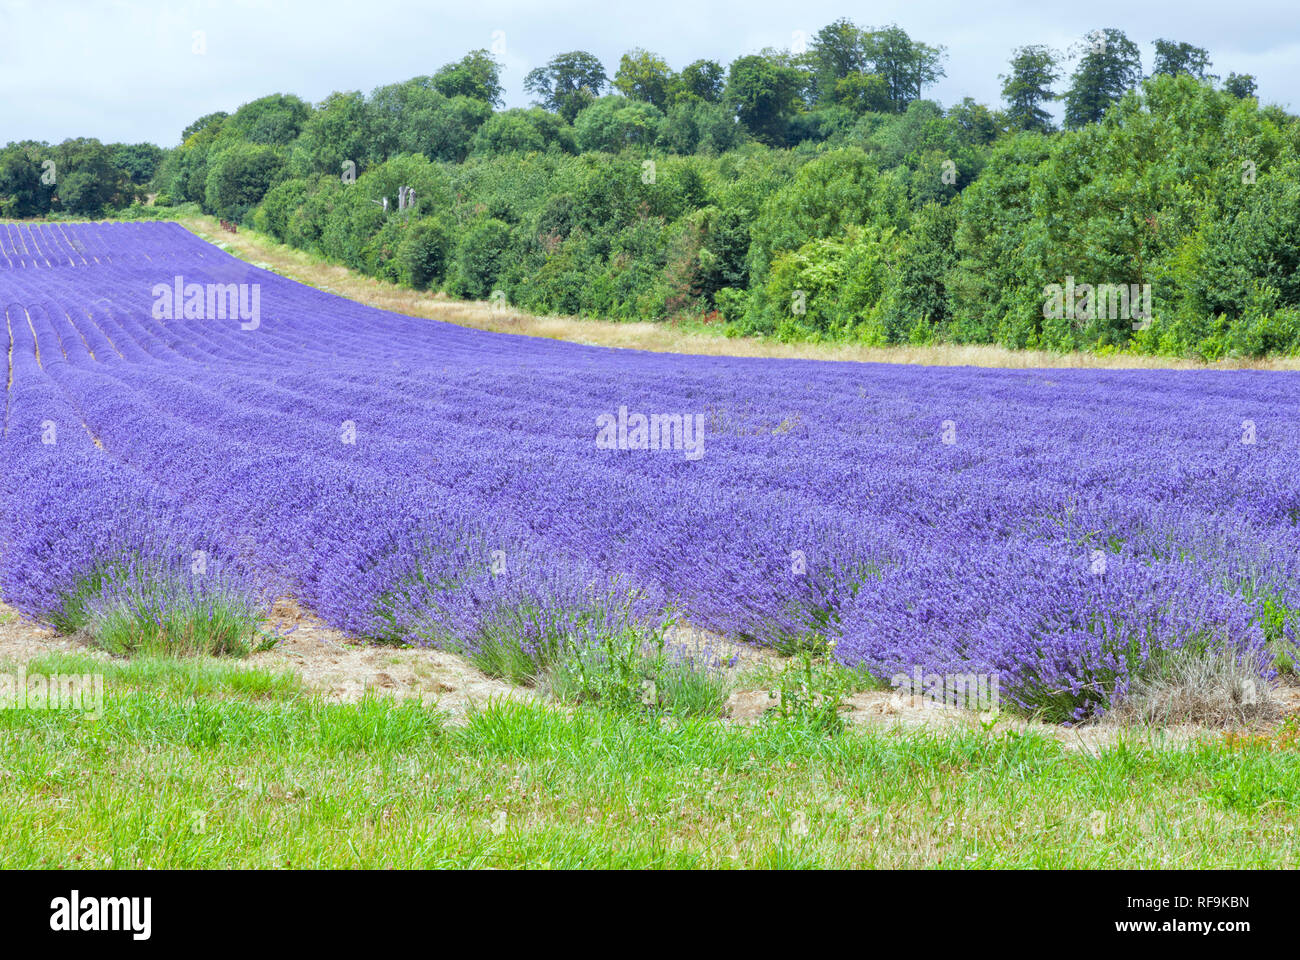 Purple lavender field in bloom on the edge of hedgerow with shrubs, trees, on a summer day . Stock Photo